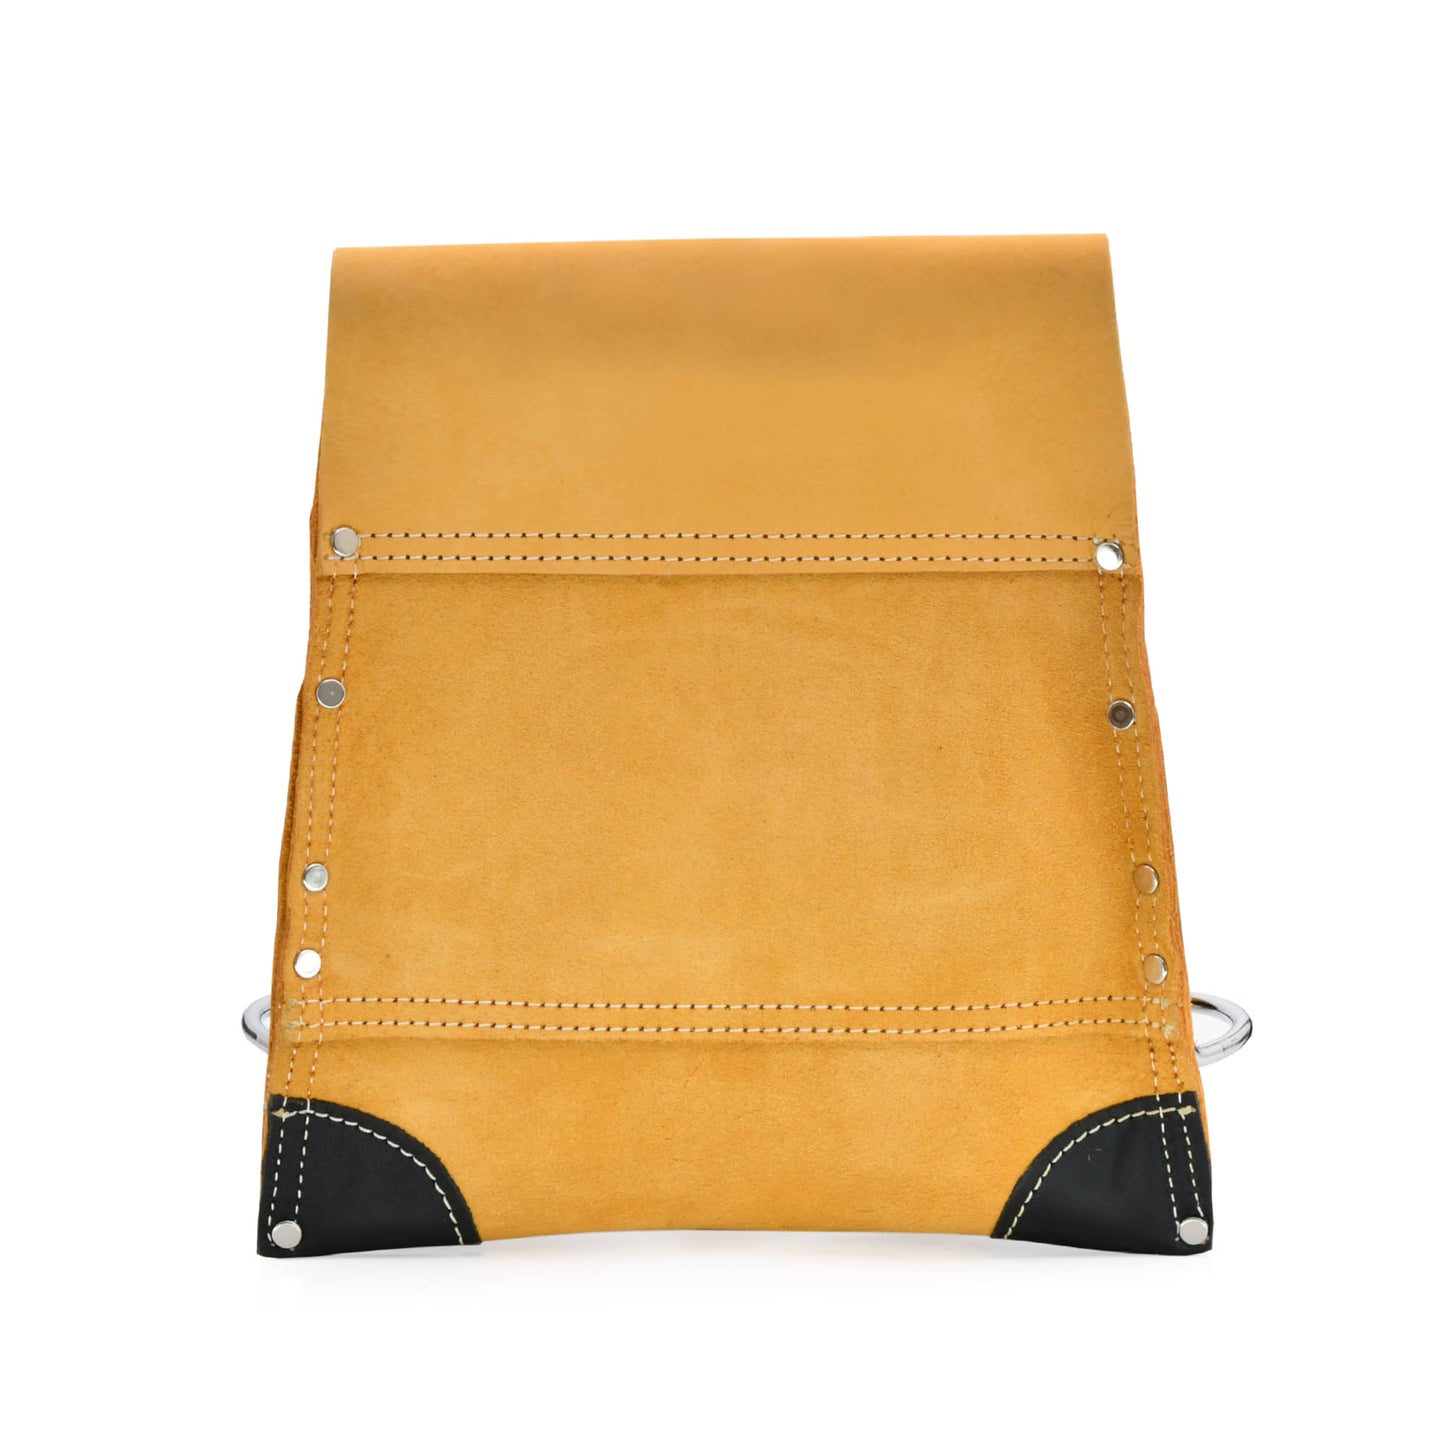 No. 8 Pouch - Handmade Leather Pouch